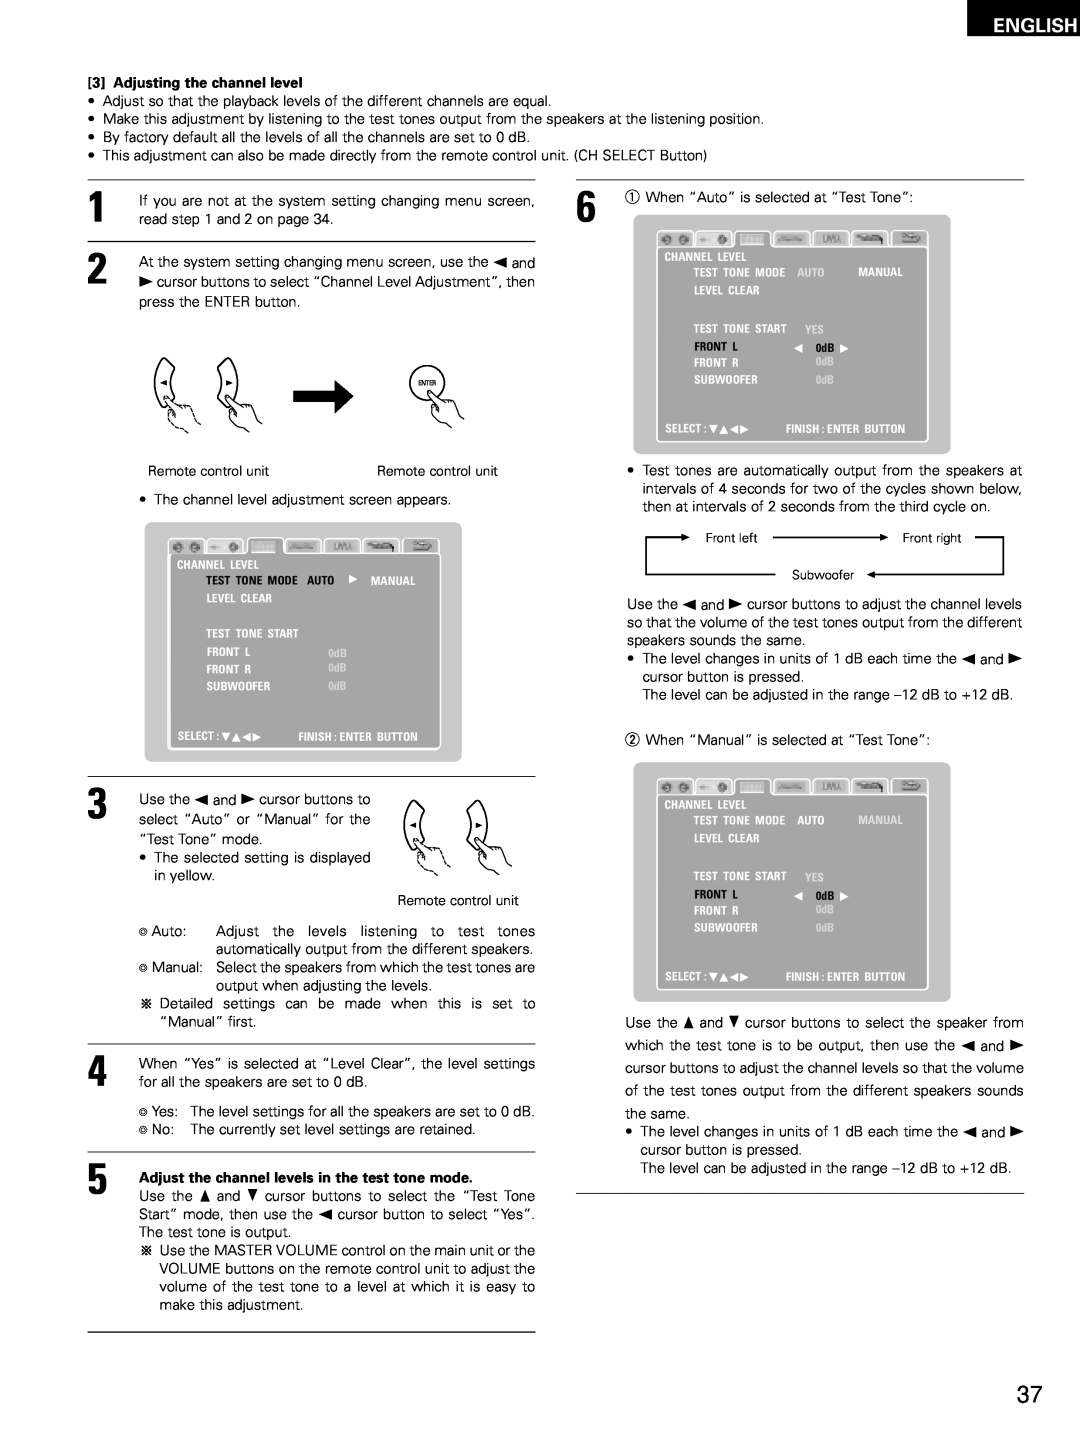 Denon ADV-M51 manual English, Adjusting the channel level, q When “Auto” is selected at “Test Tone”, read and 2 on page 